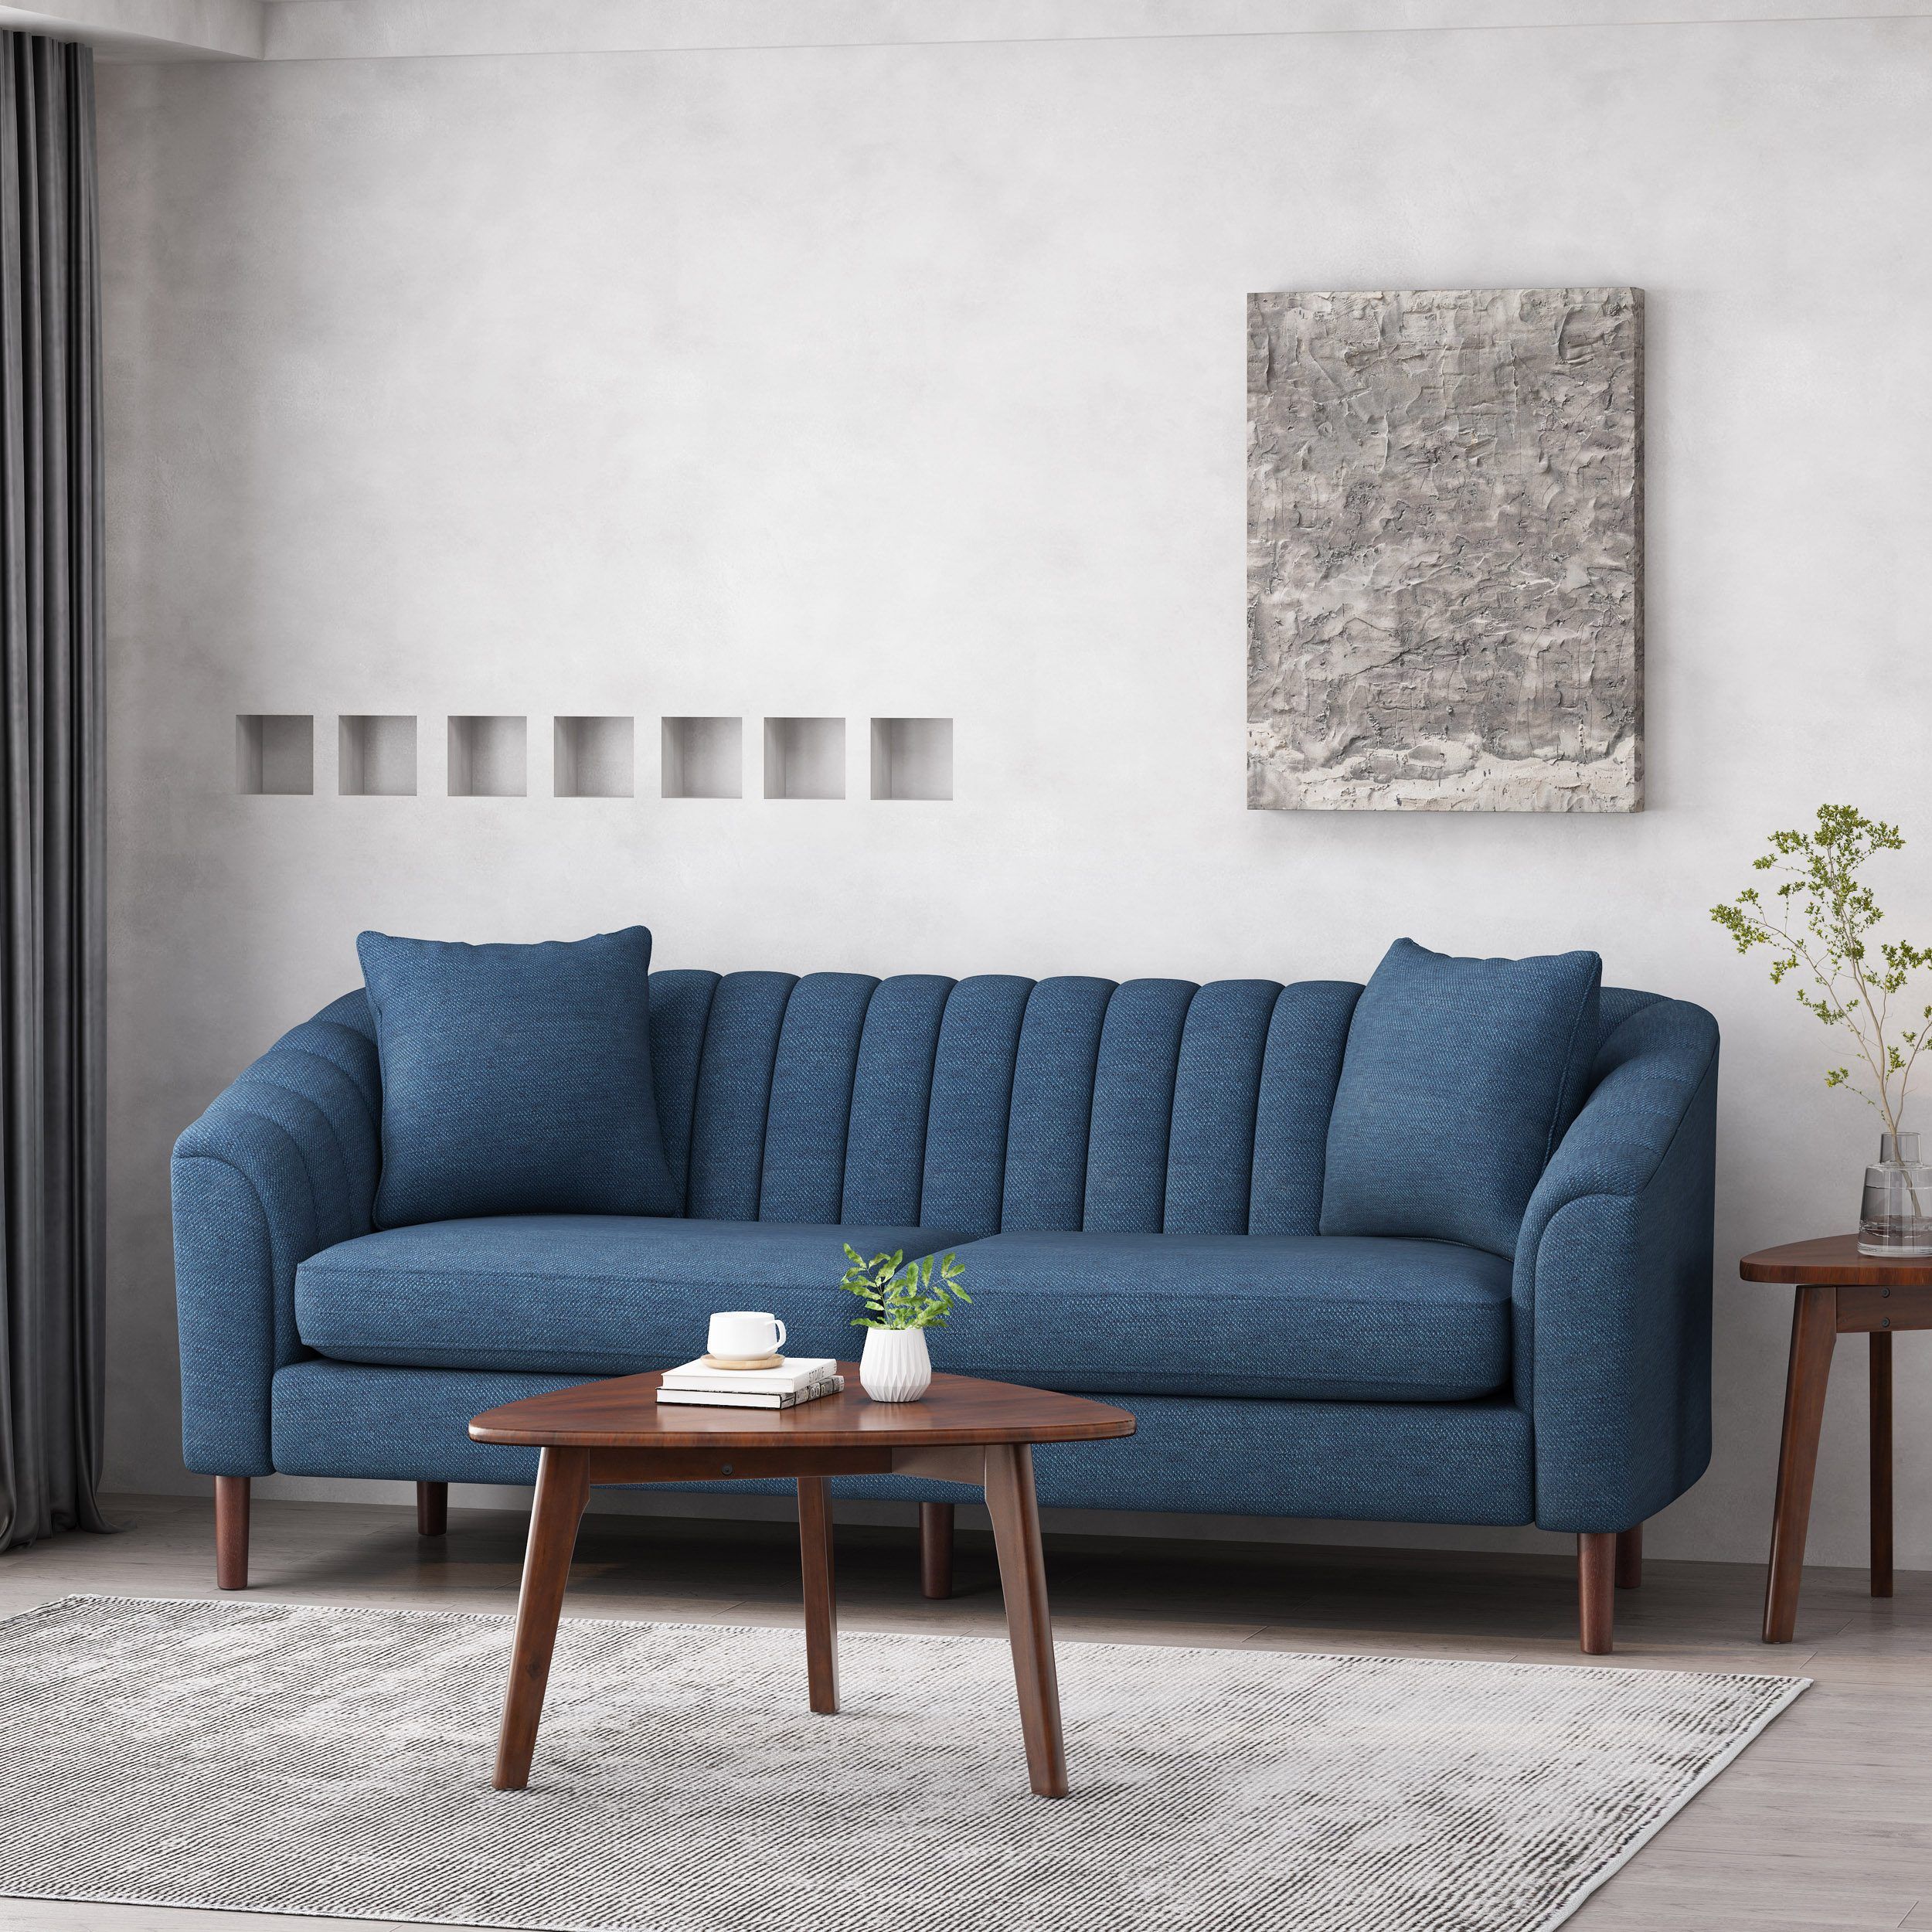 3 Seaters Sofas “The Perfect Fit: Why 3 Seater Sofas are the Ideal Choice for Your Living Room”